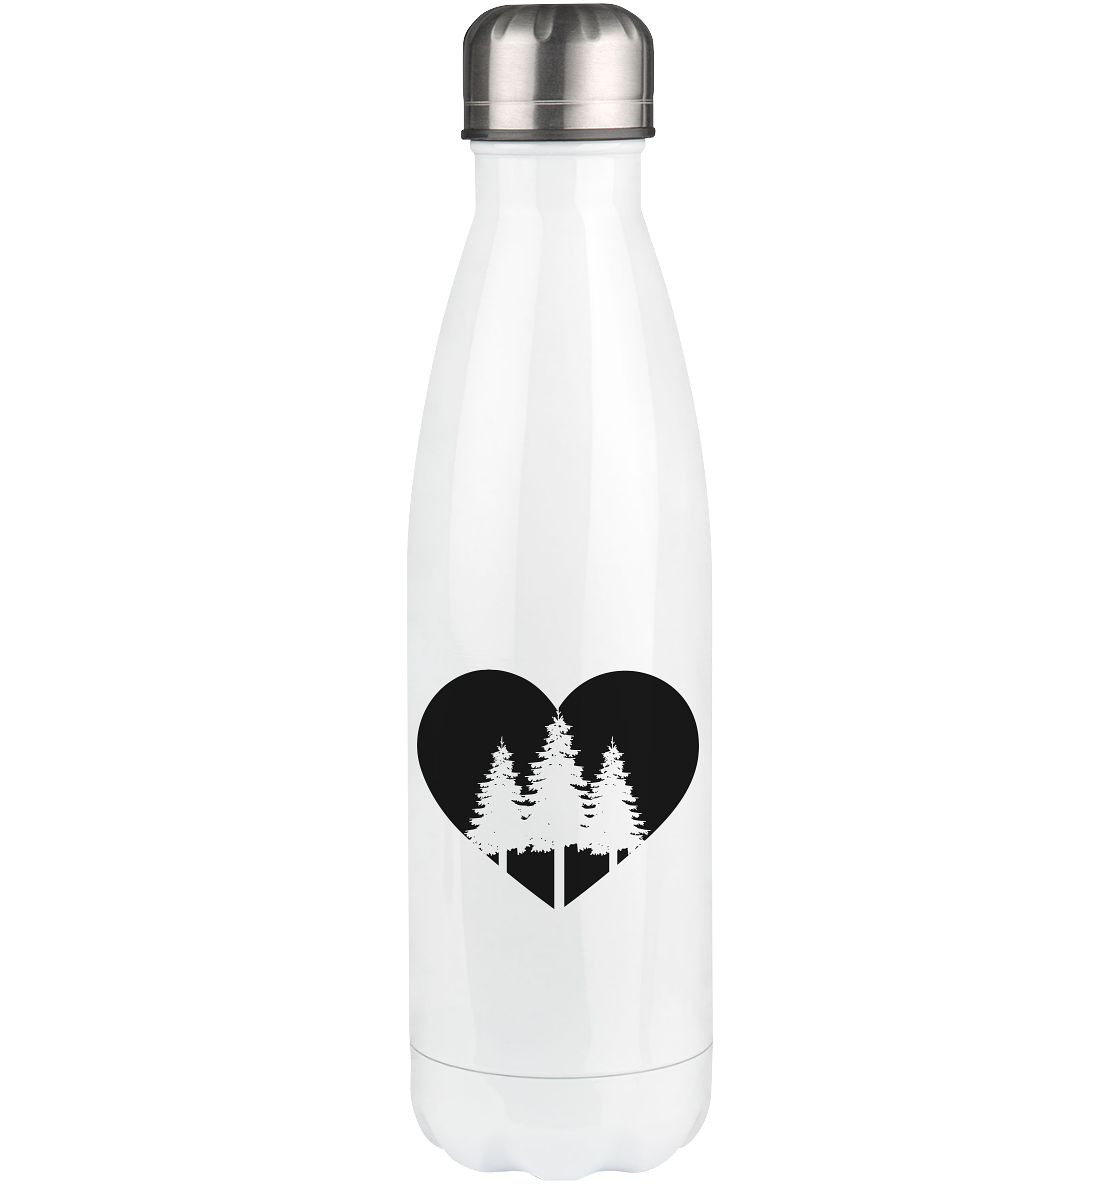 Heart 1 and Trees - Edelstahl Thermosflasche camping UONP 500ml